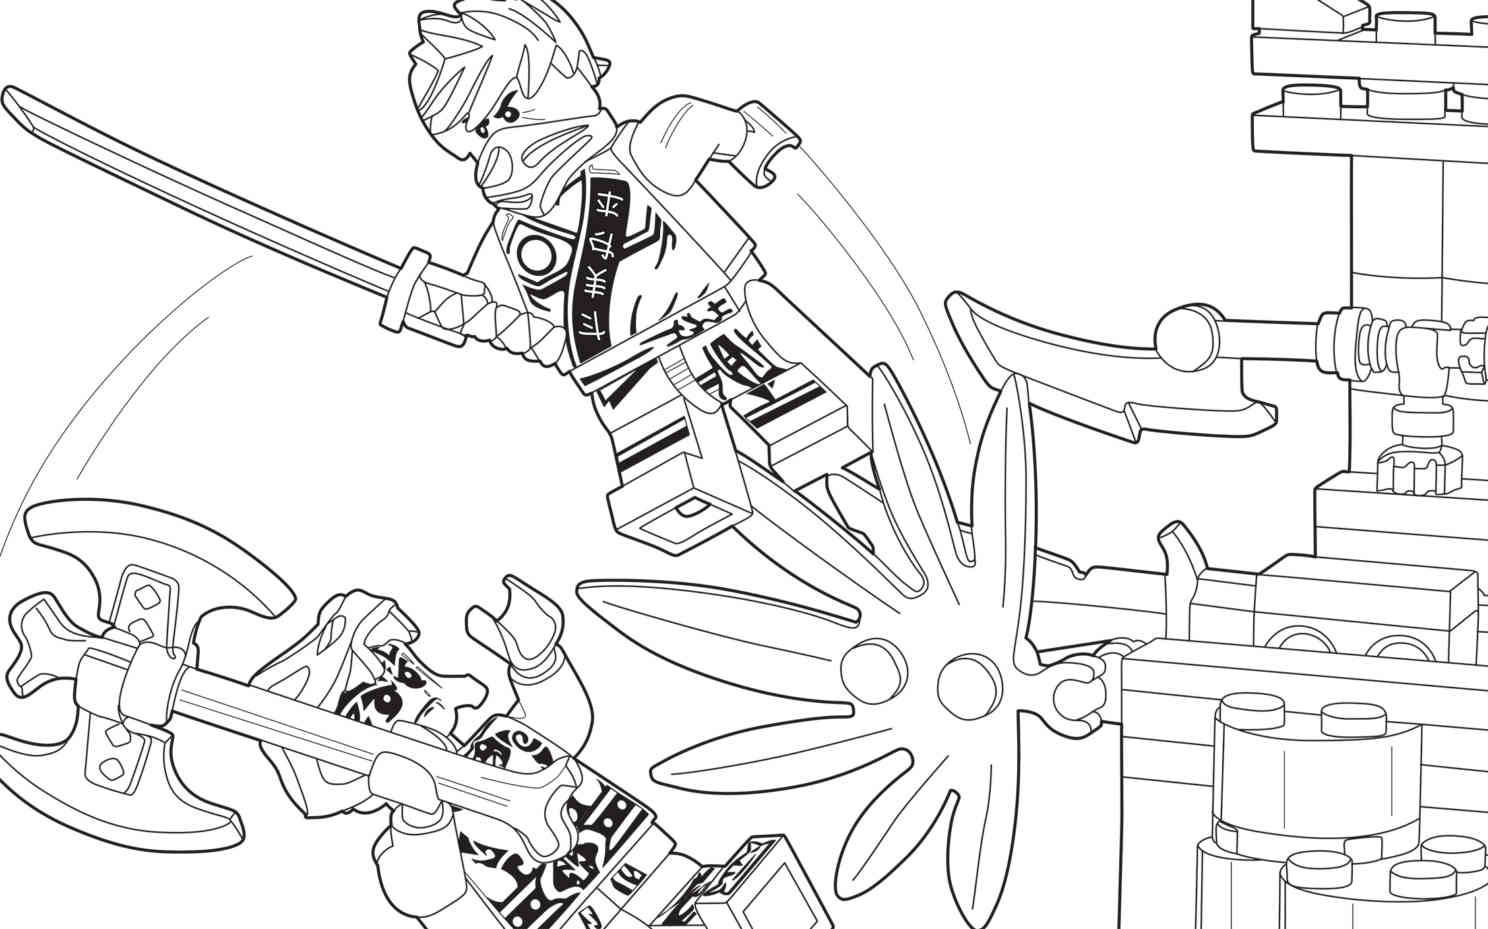 Lego Ninjago Coloring Page (20 Pictures) - Colorine.net | 2868